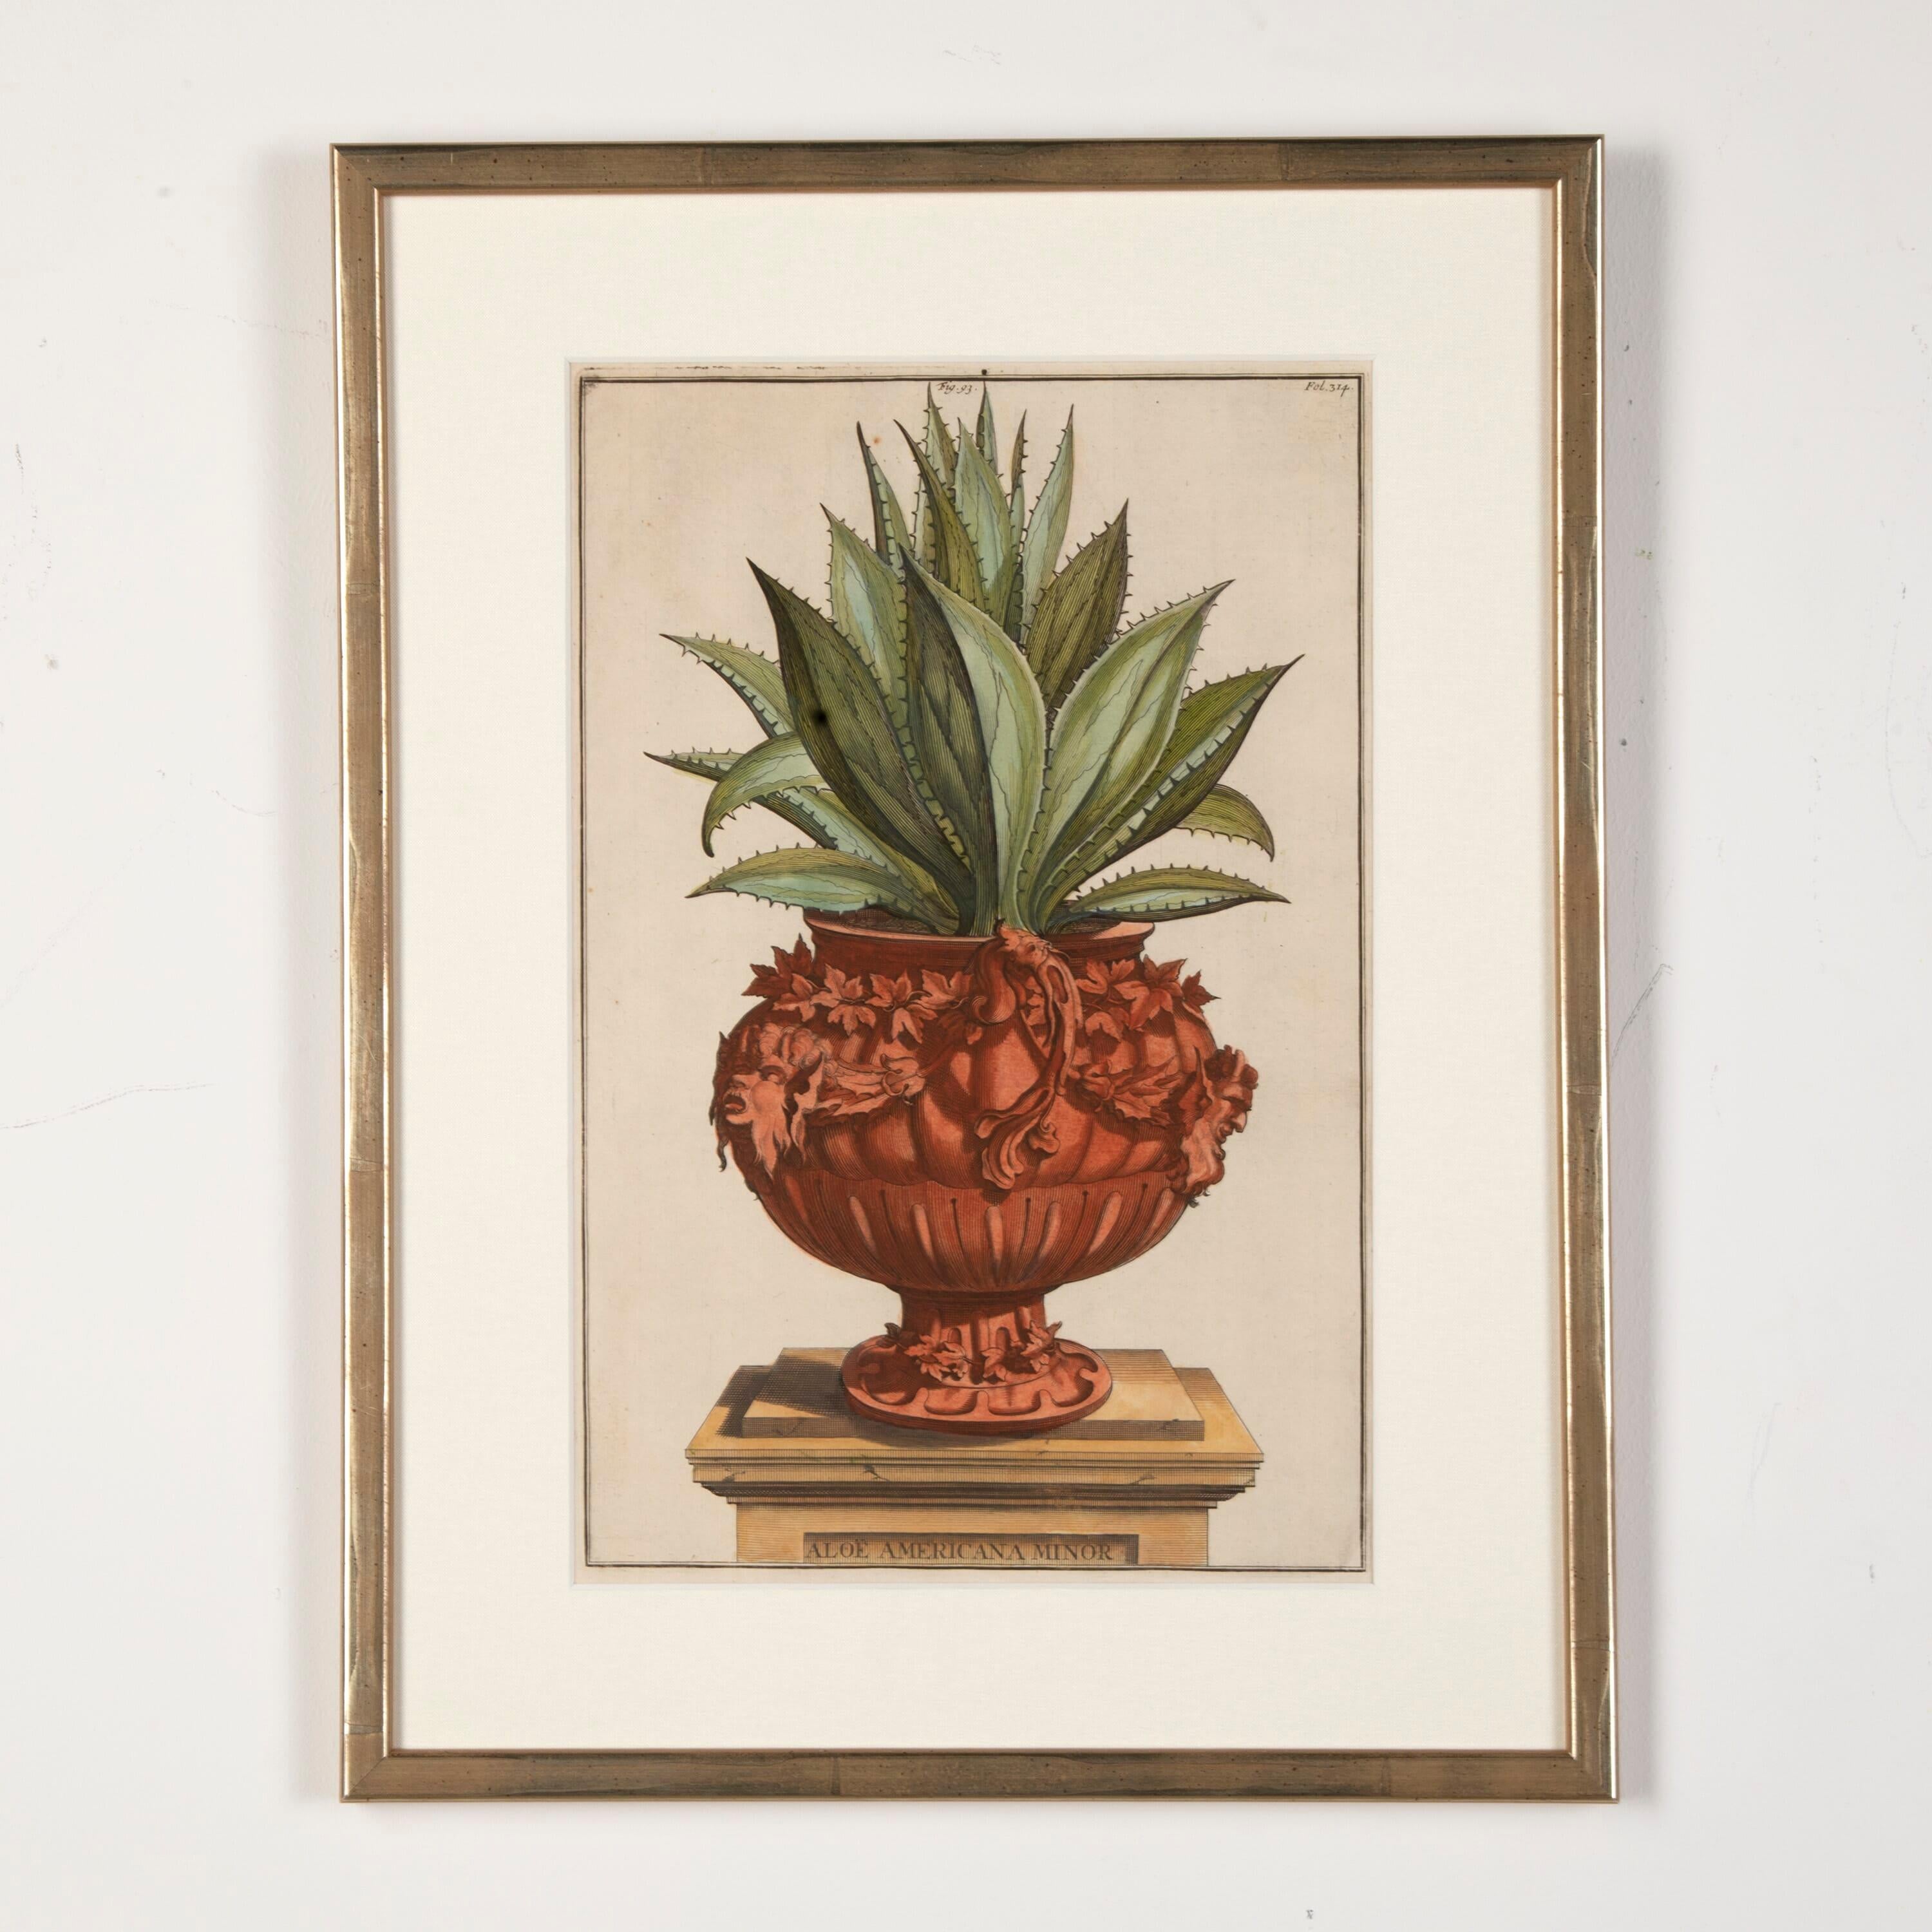 Superb set of original terracotta potted botanicals by Abraham Munting, dated 1697.

These sought-after prints are framed in champagne gold frames with a hessian mount and ar70 art glass for optimal glarity.

The colour palettes within each are